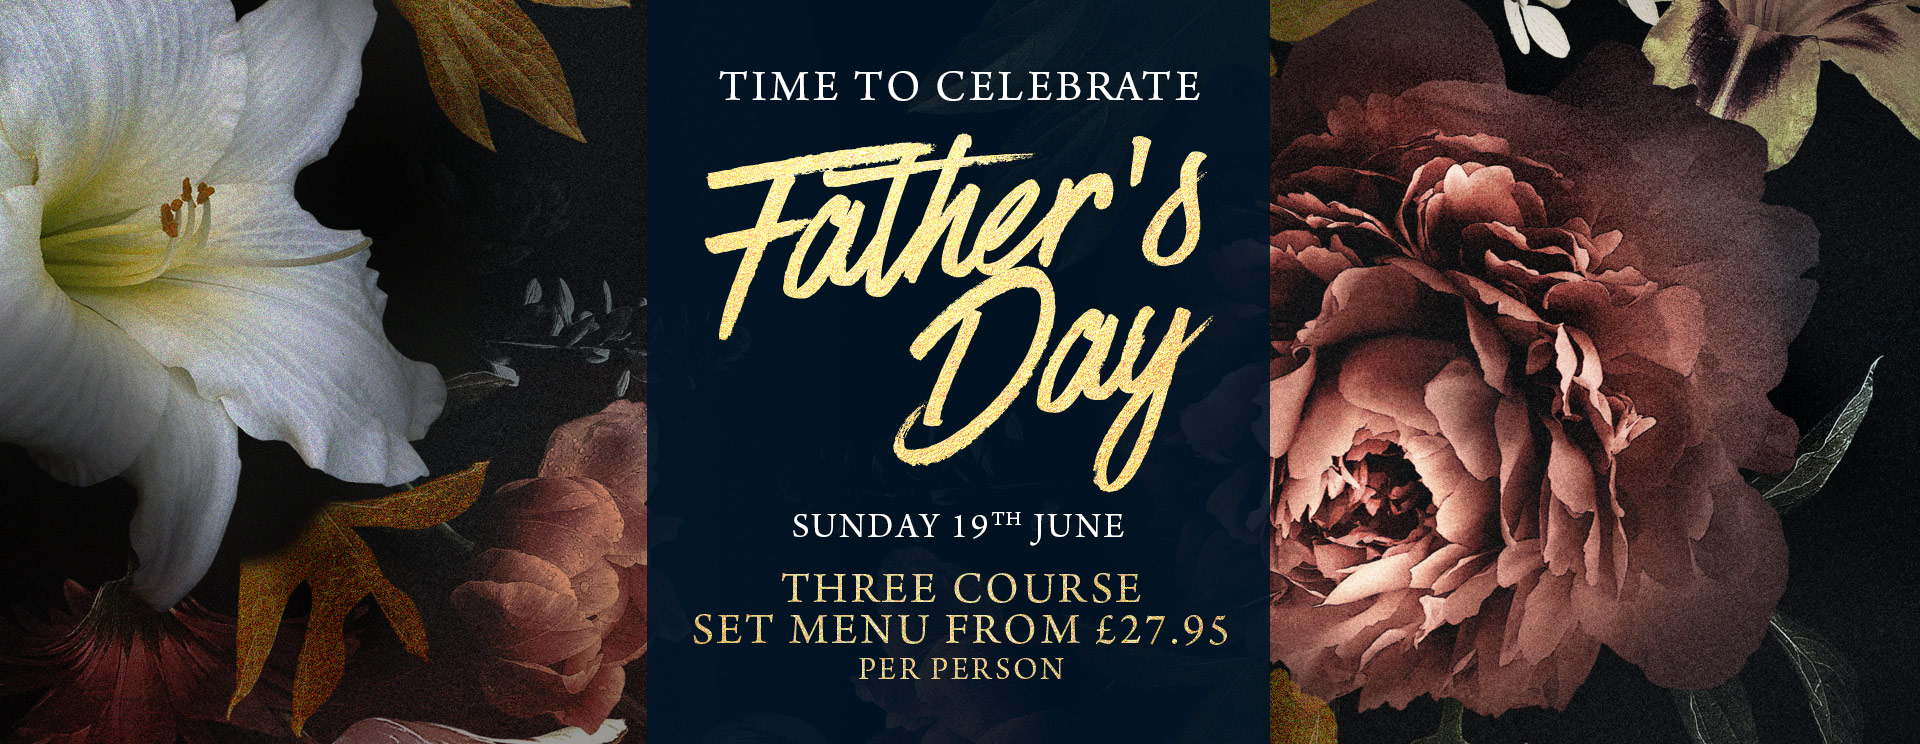 Fathers Day at The Plough Inn